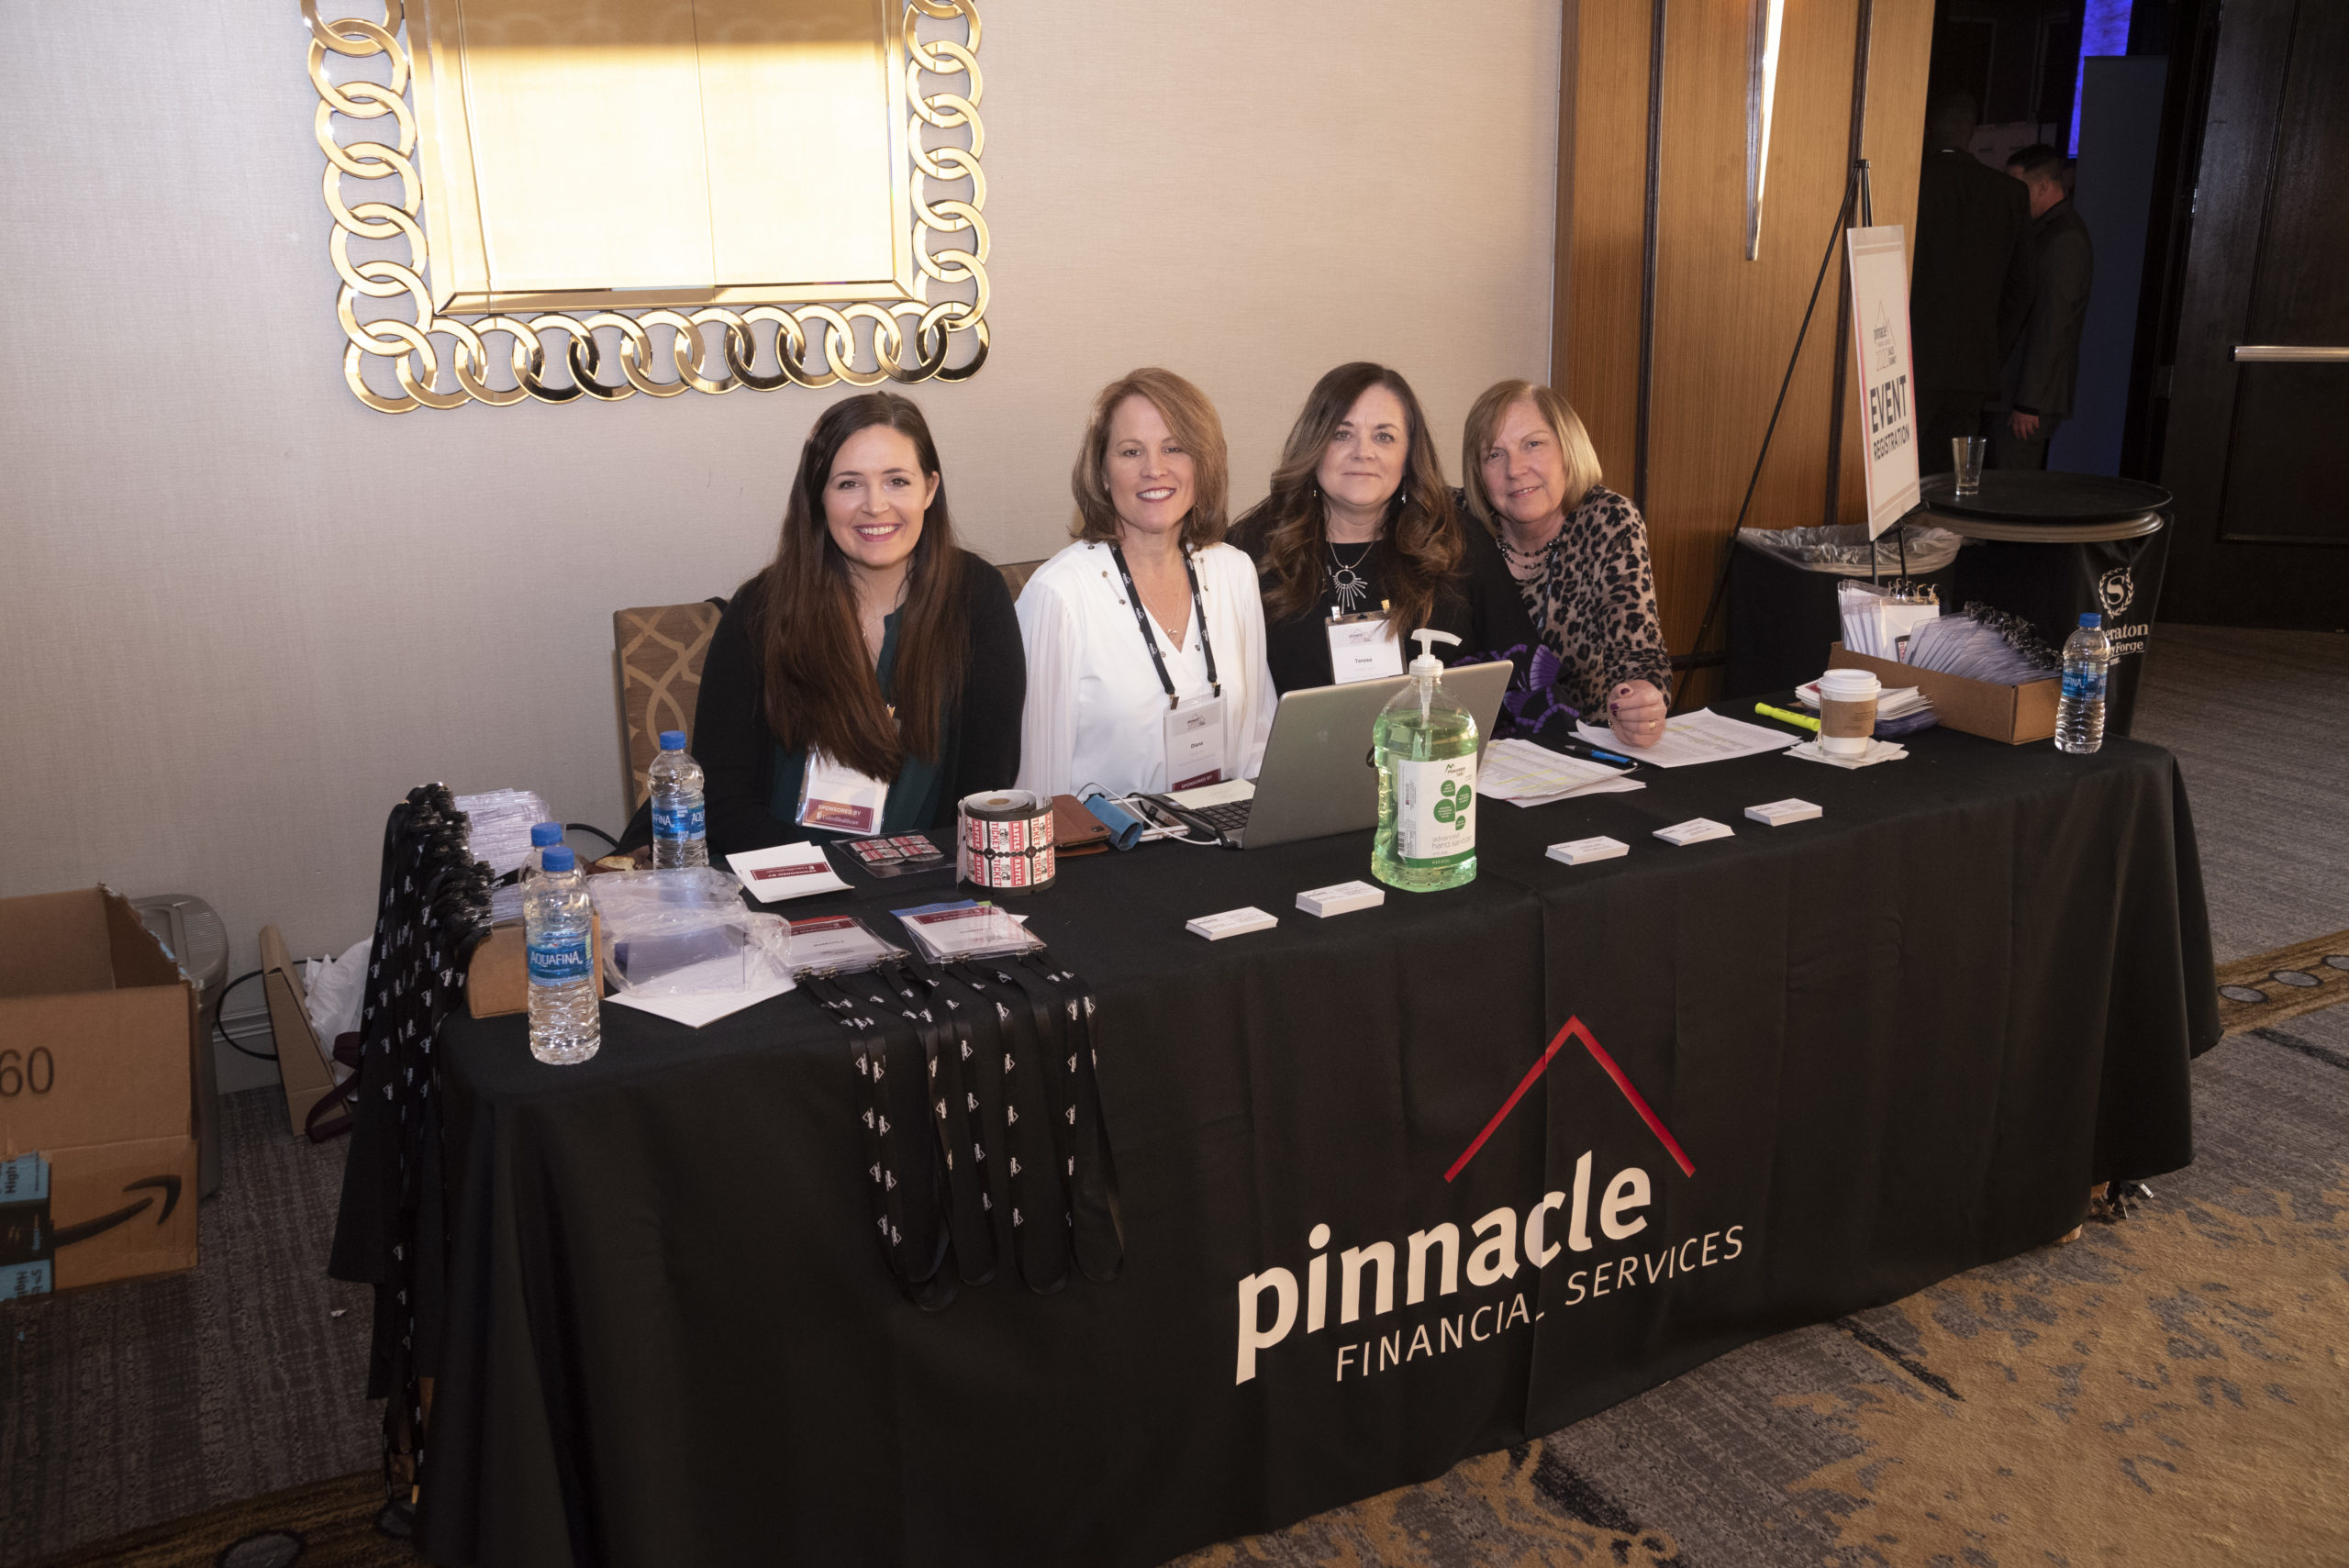 Our Support Team welcoming guests at the 2021 Sales Summit